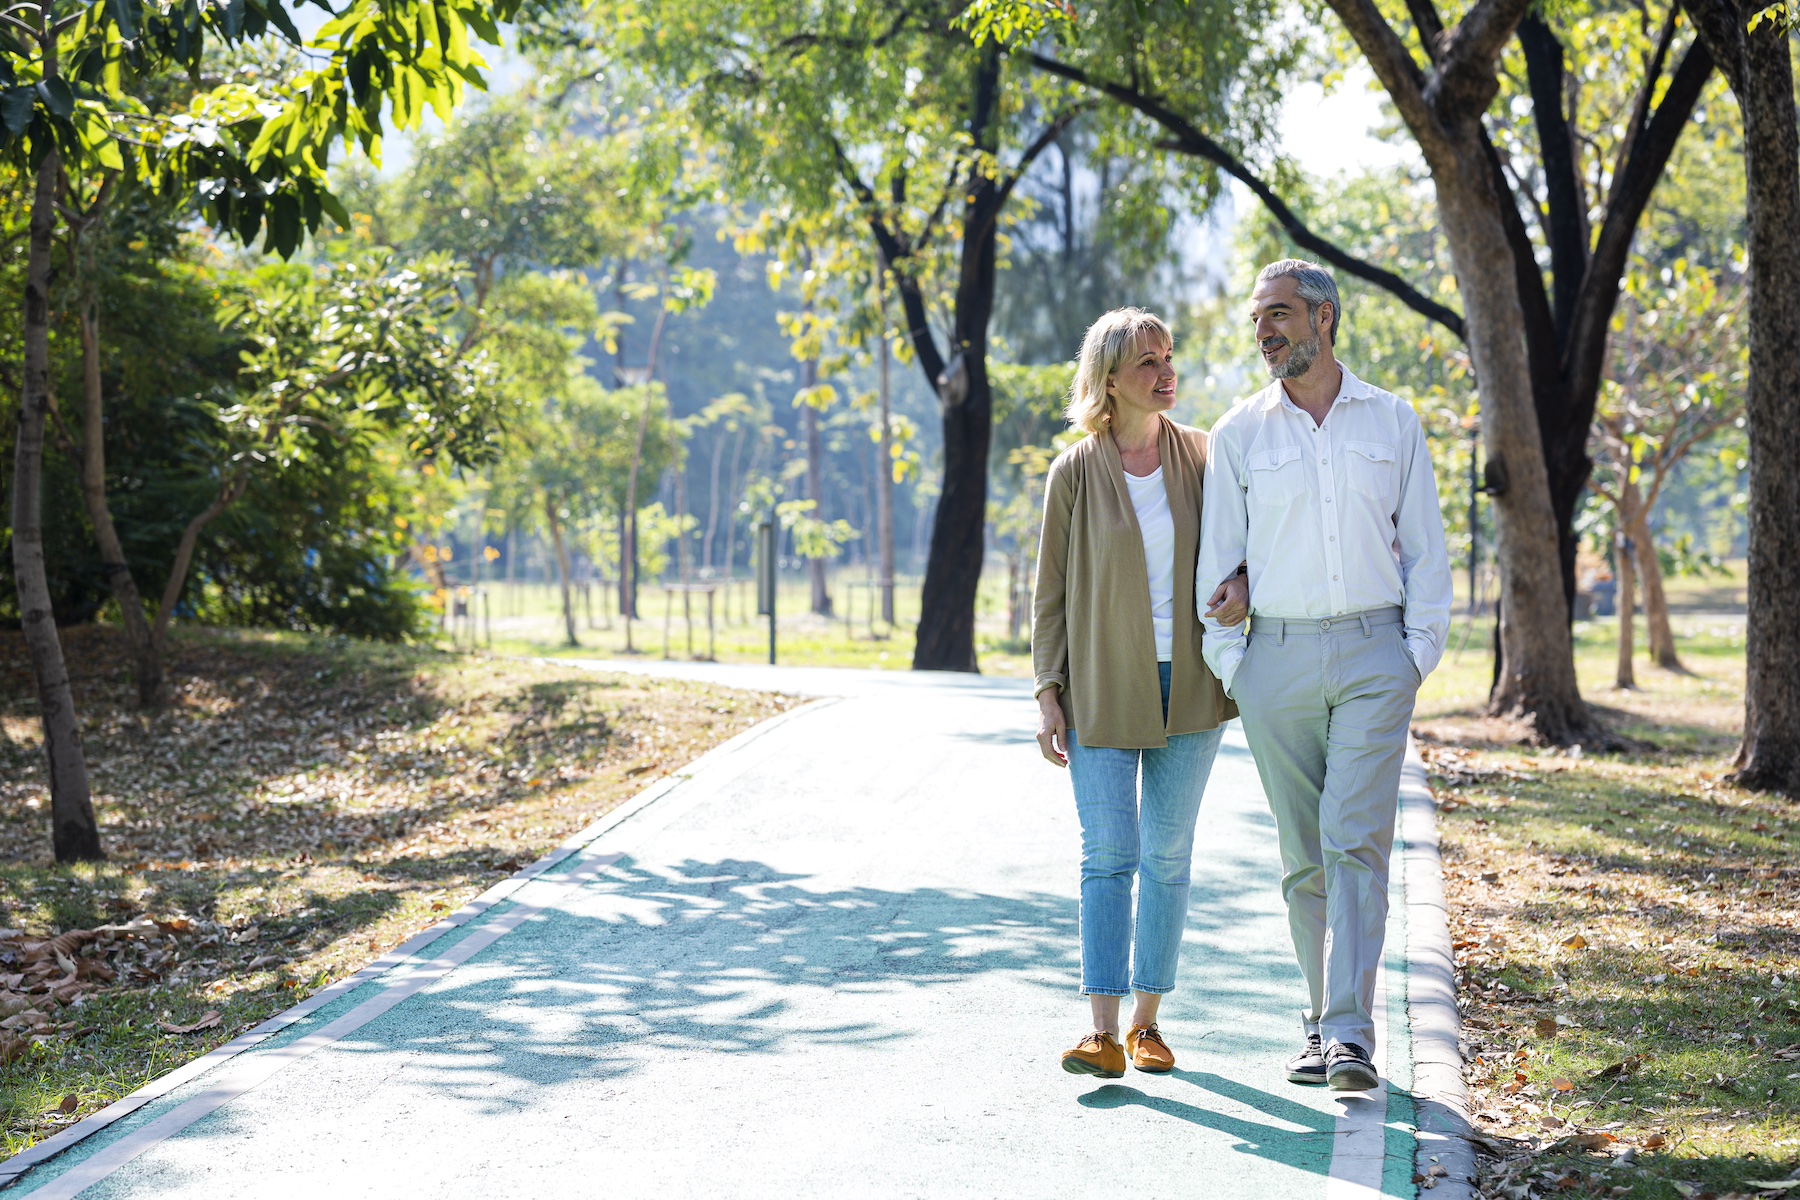 An older couple takes a morning walk together through the park